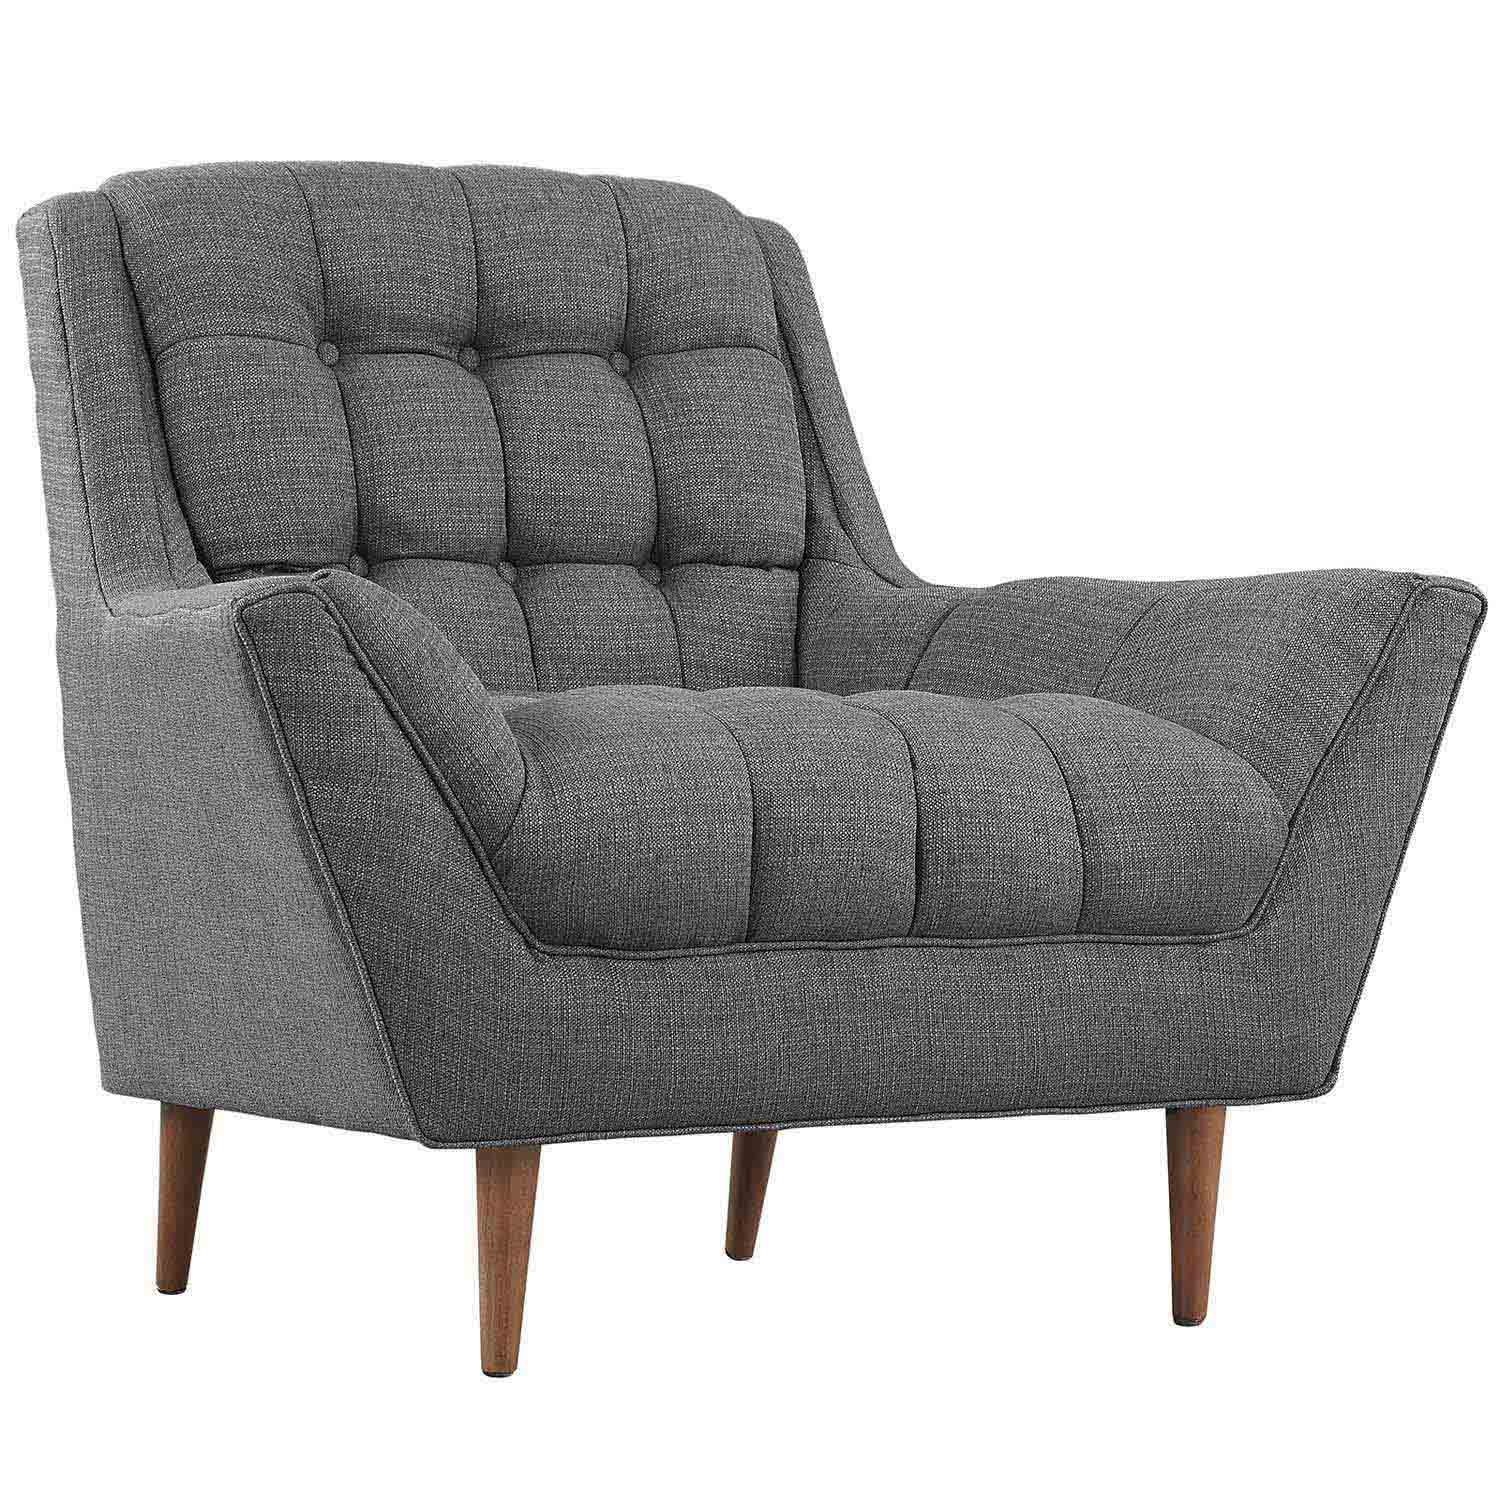 Modway Response Fabric Arm Chair - Gray